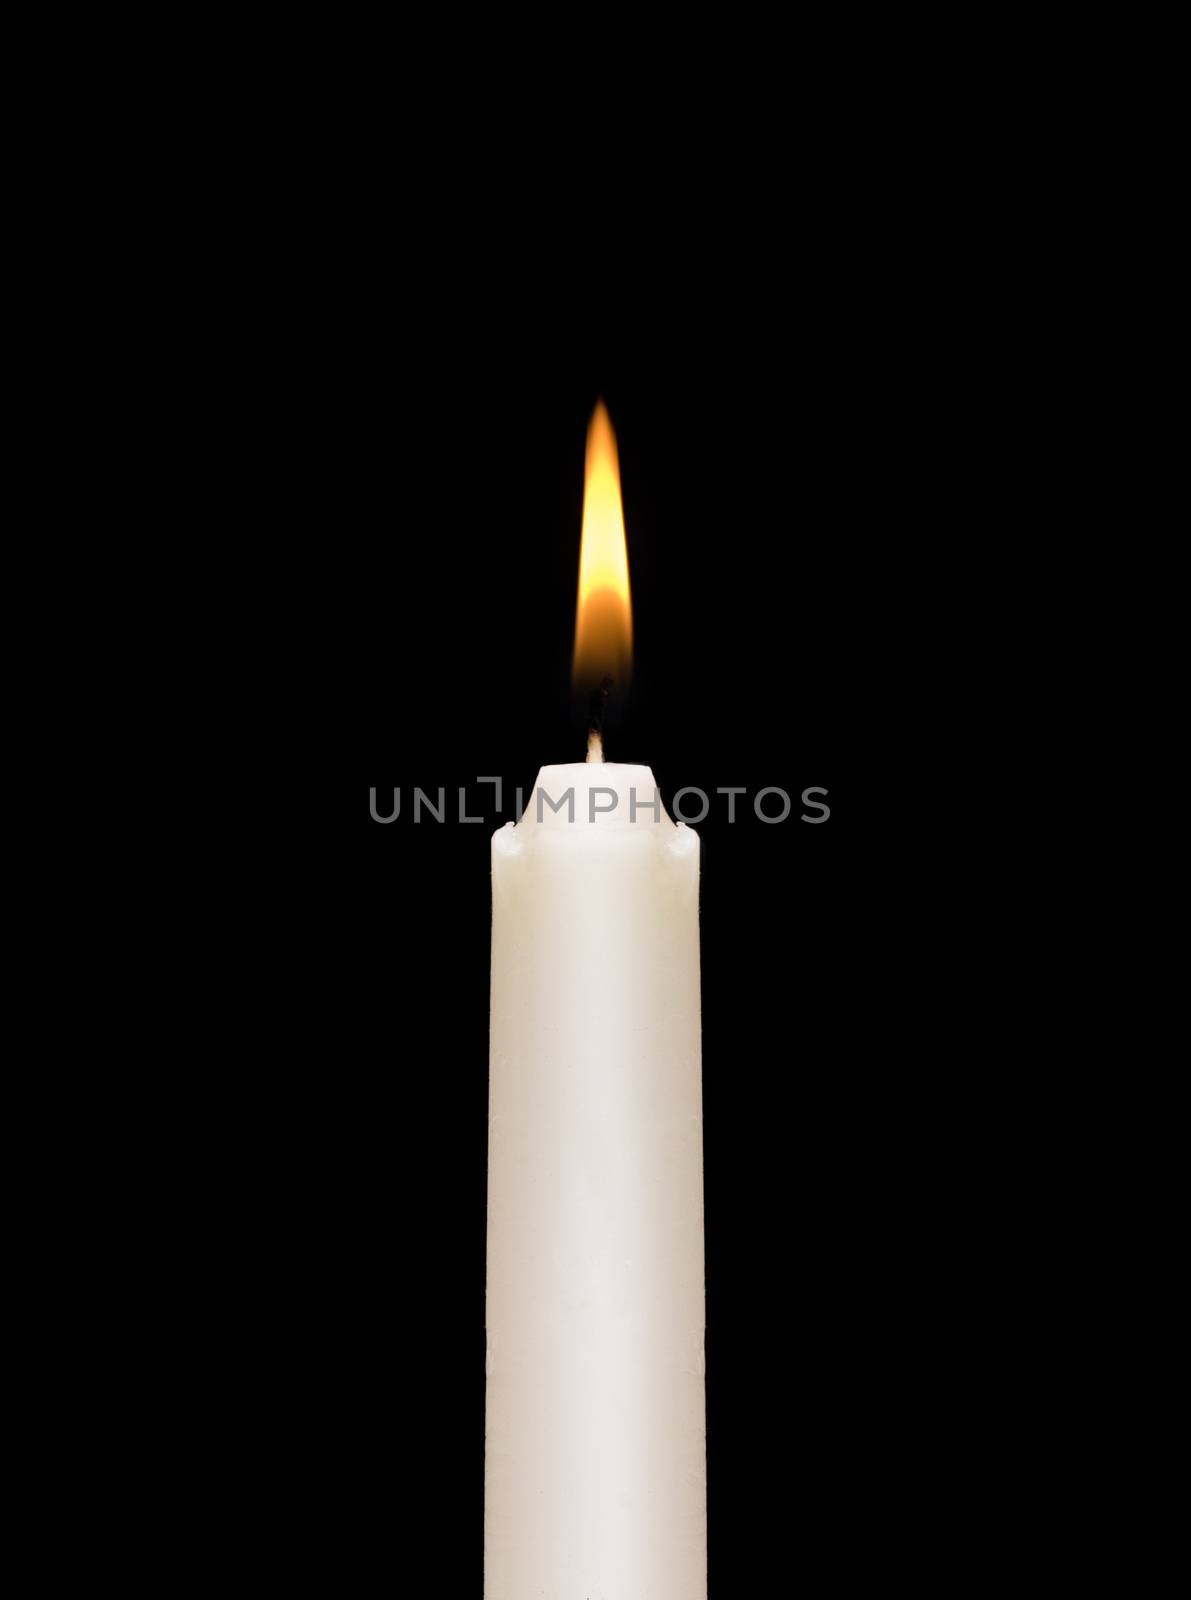 A burning white candle on a black background.